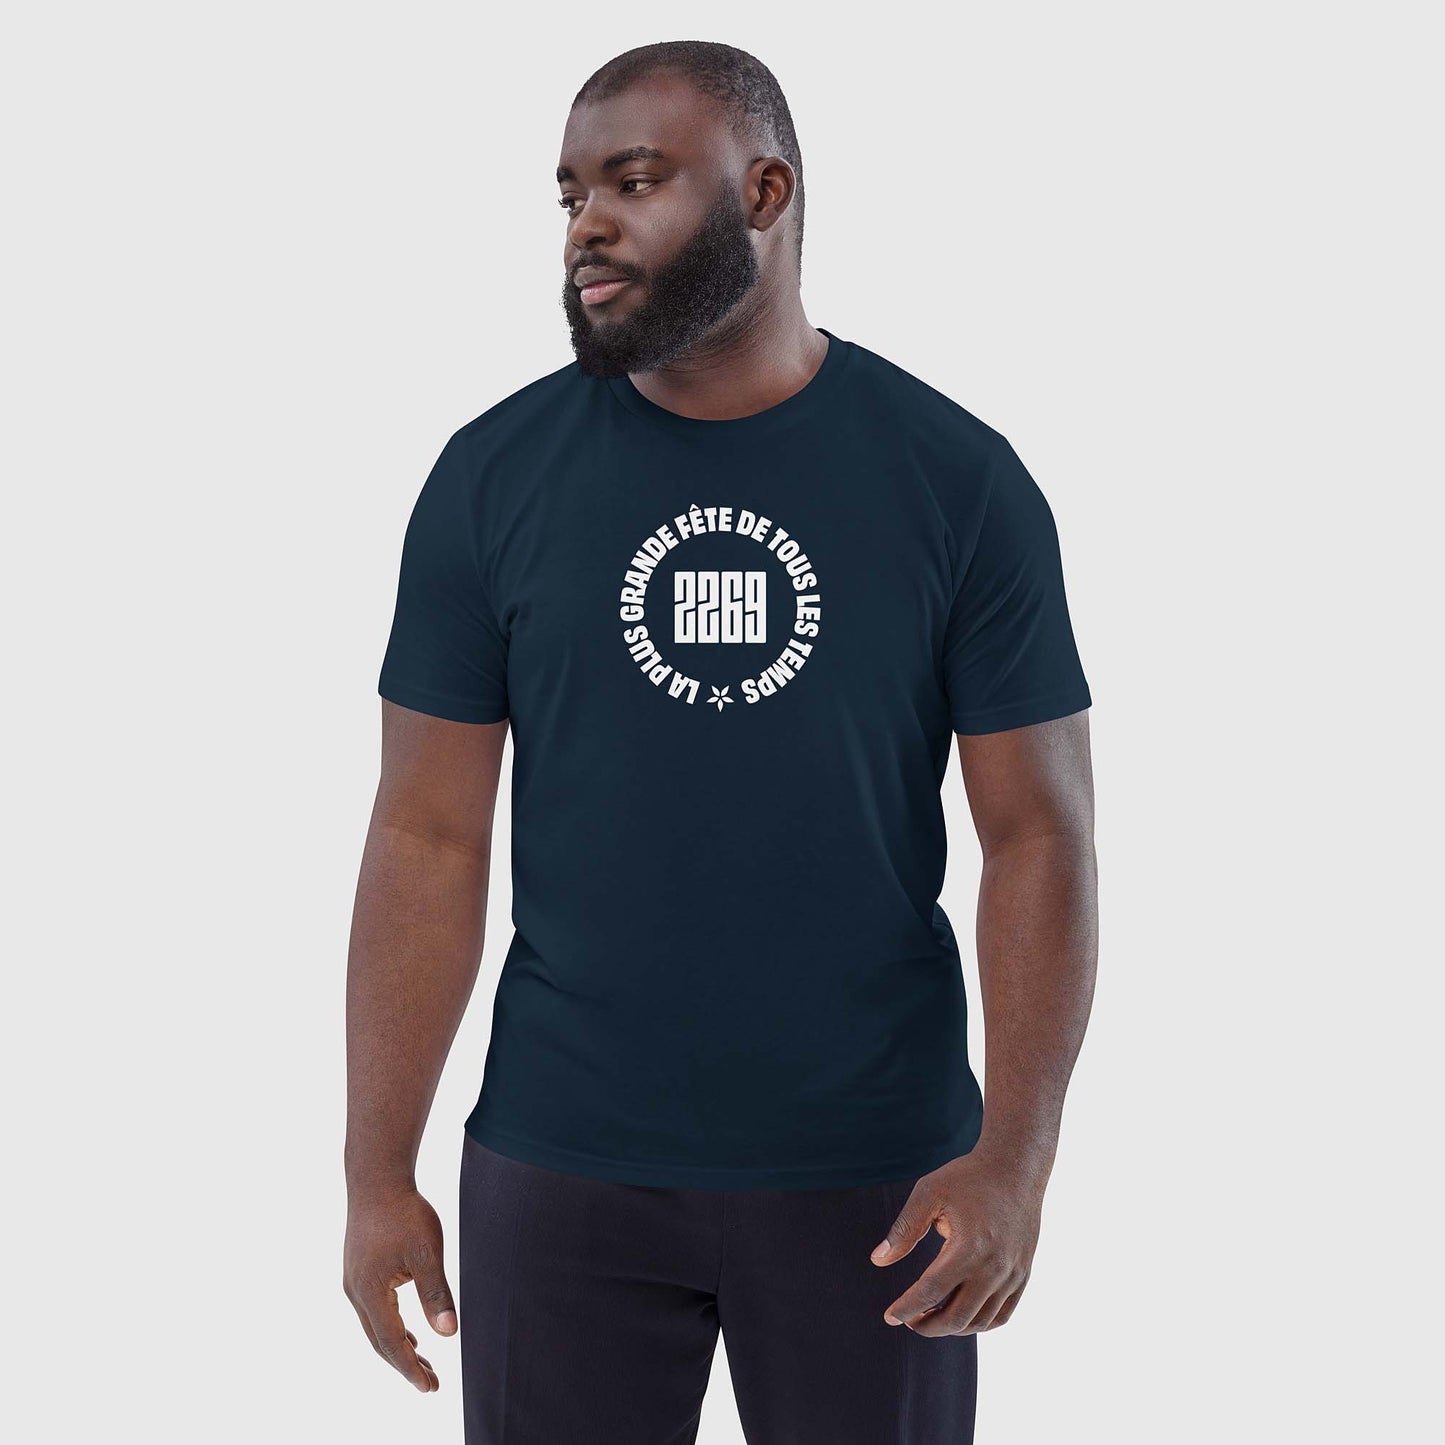 Men's navy organic cotton t-shirt with French 2269 party circle